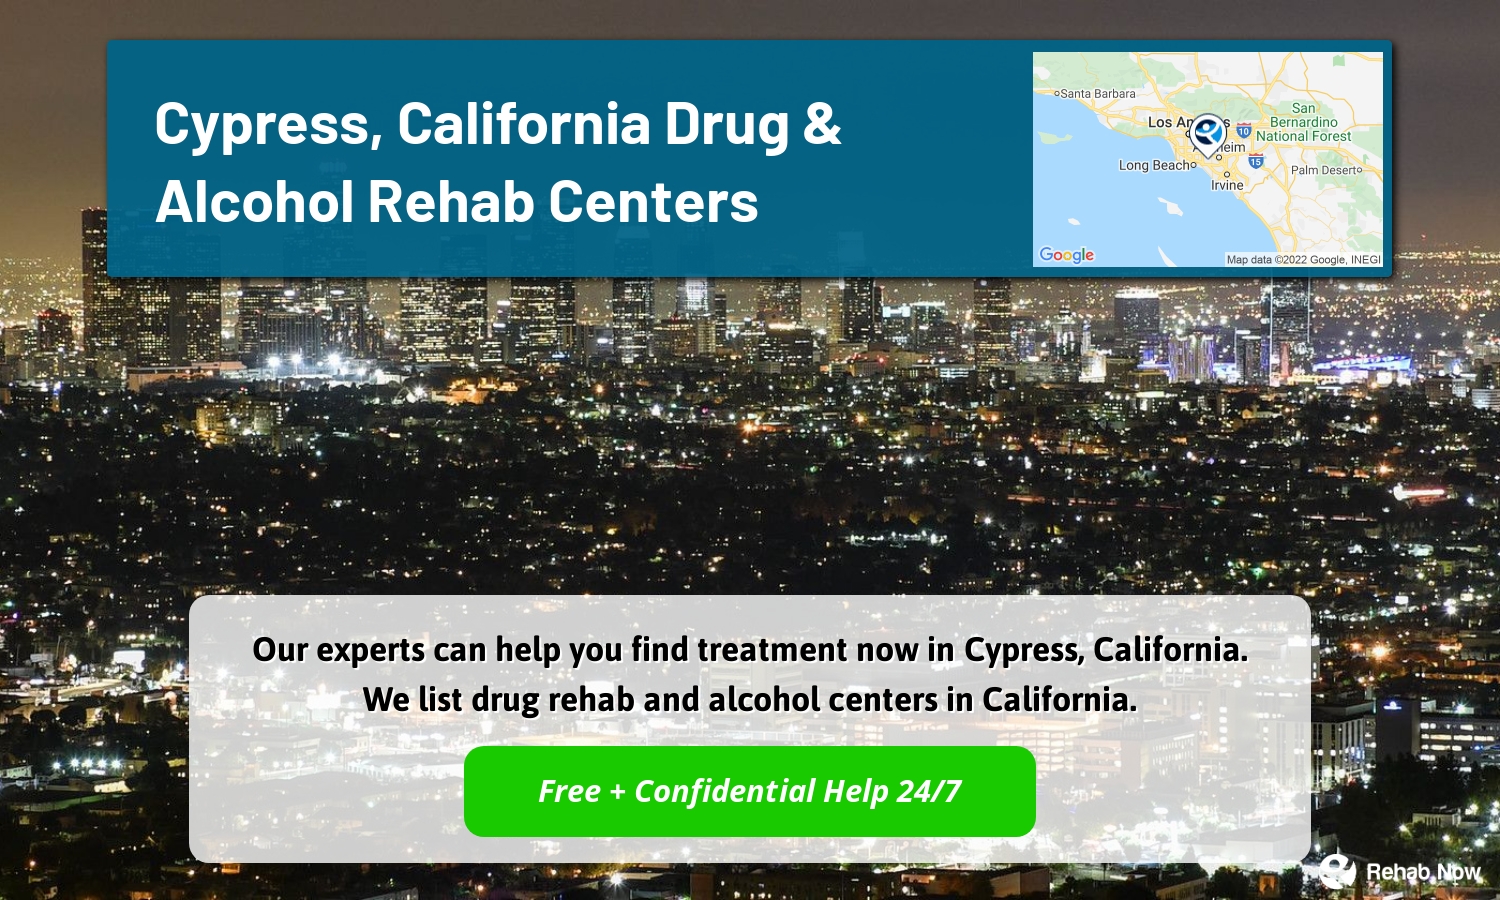 Our experts can help you find treatment now in Cypress, California. We list drug rehab and alcohol centers in California.